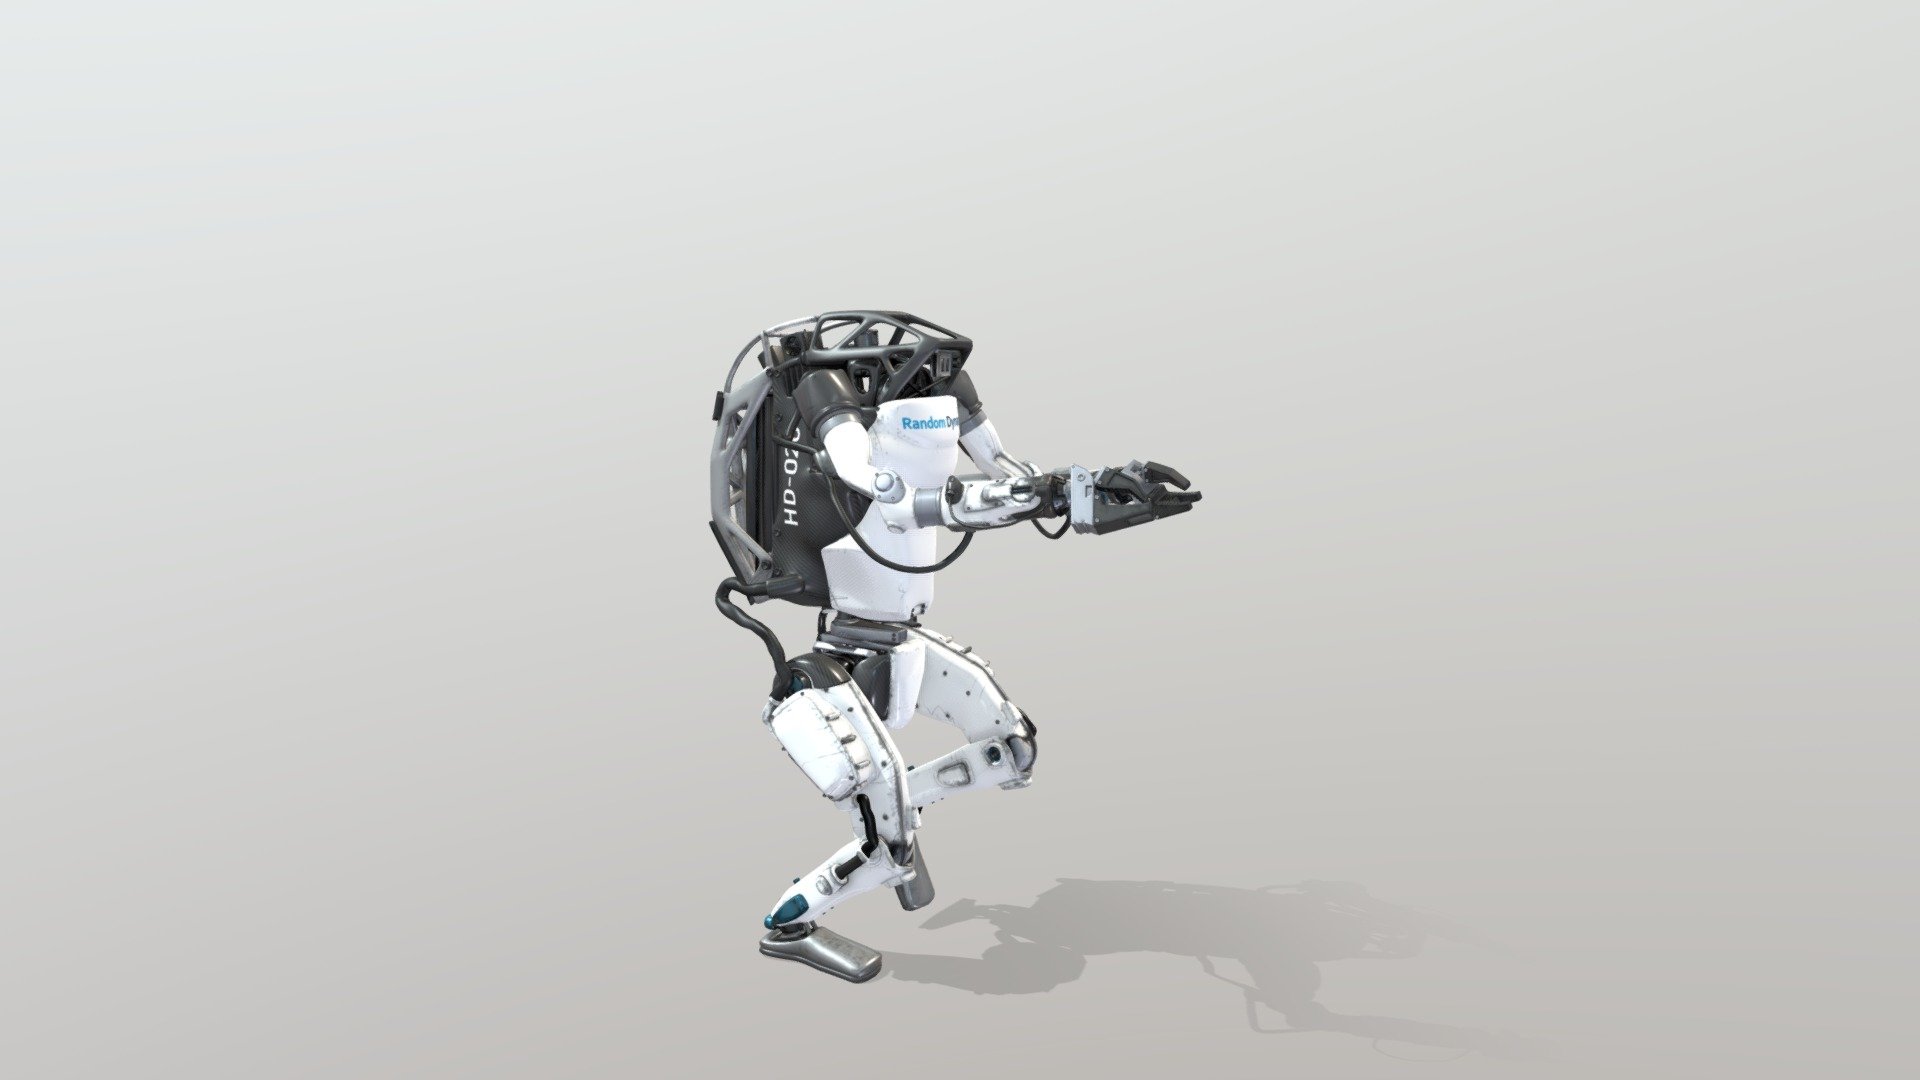 This is Random Represent version of Atlas 2023 the robot of boston dynamics animated full rigged.
Blender file and FBX.                                                                                                                                                                                                                        

Unwrapped UV. PBR material.                                                                                                                                                                                                        

Textures and maps 4096x4096 resolution in .png file format.                                                                    

Included texture maps: Diffuse, Normal, Ambient Occlusion, Specular, Roughness.                           

Printable 3d model